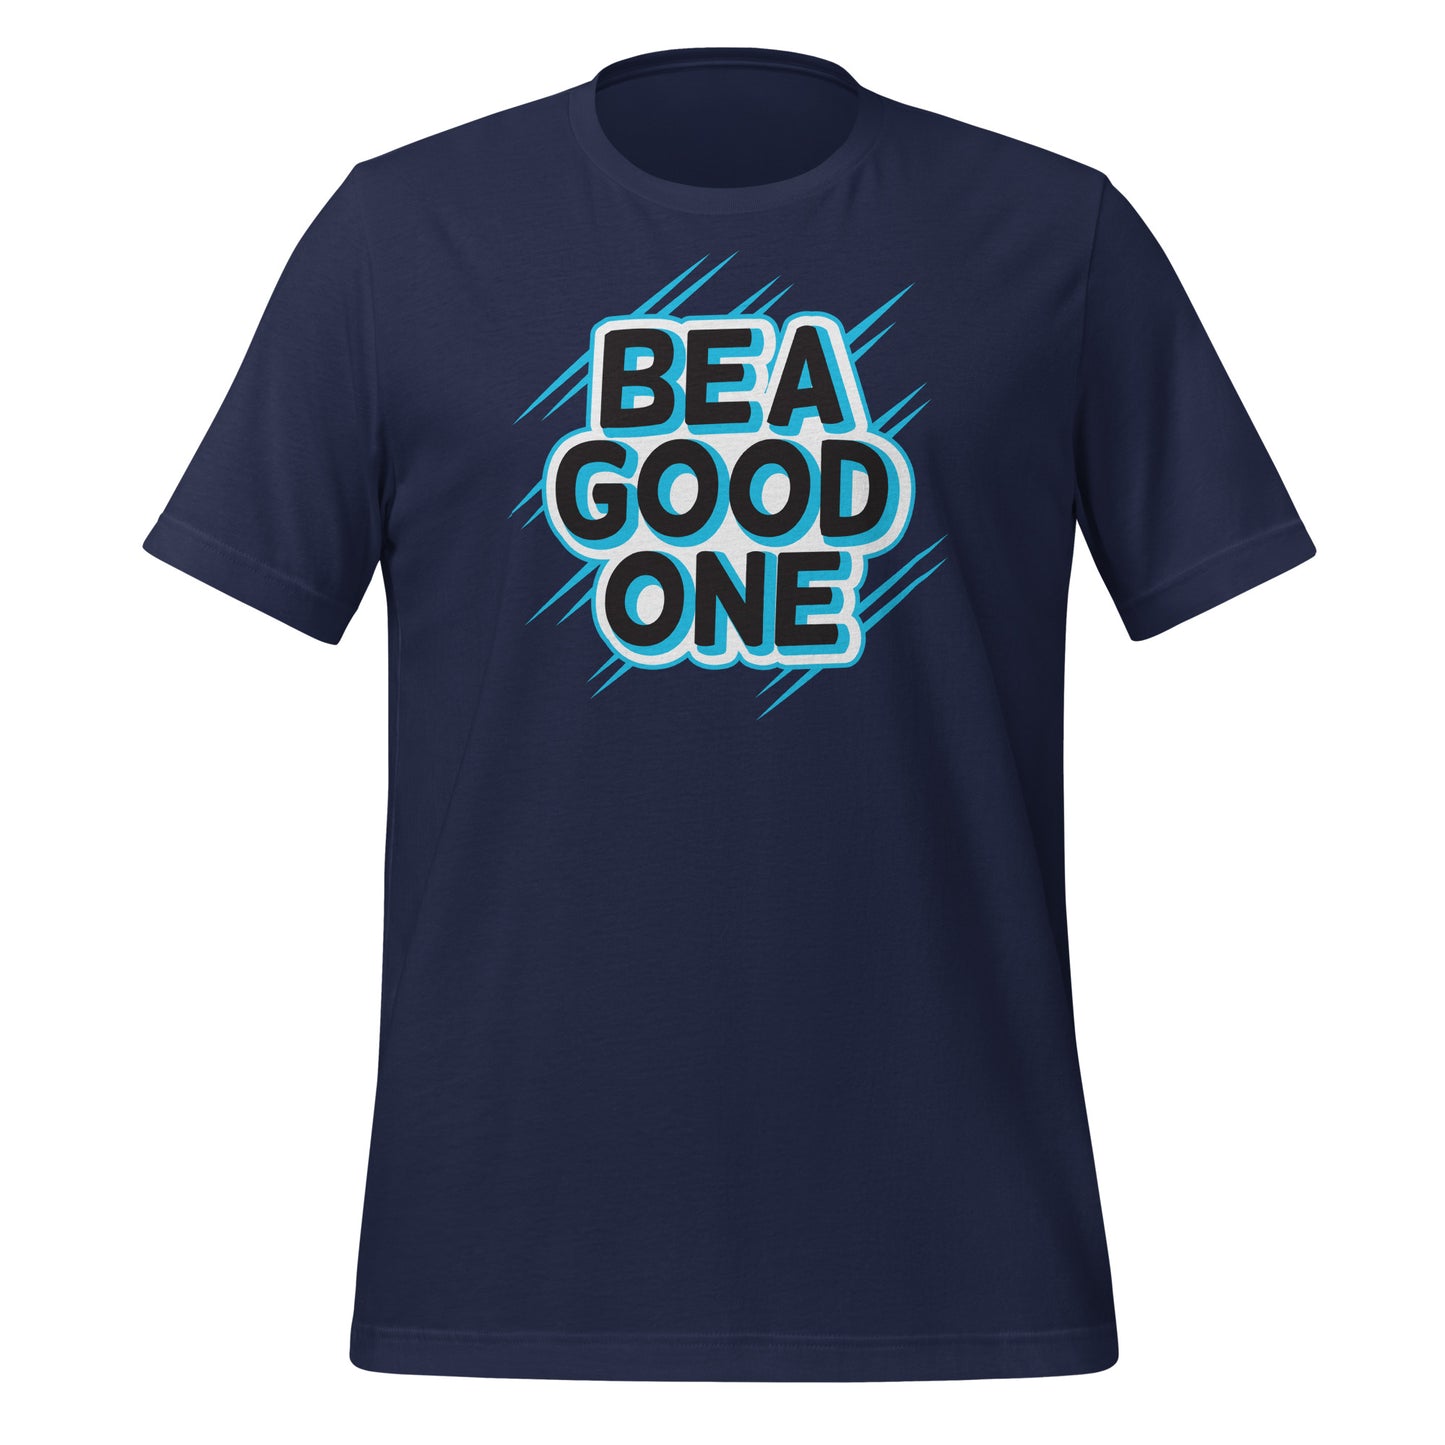 Be Good One- Inspiring Graphic Tee for Positive Vibes & Good Deeds